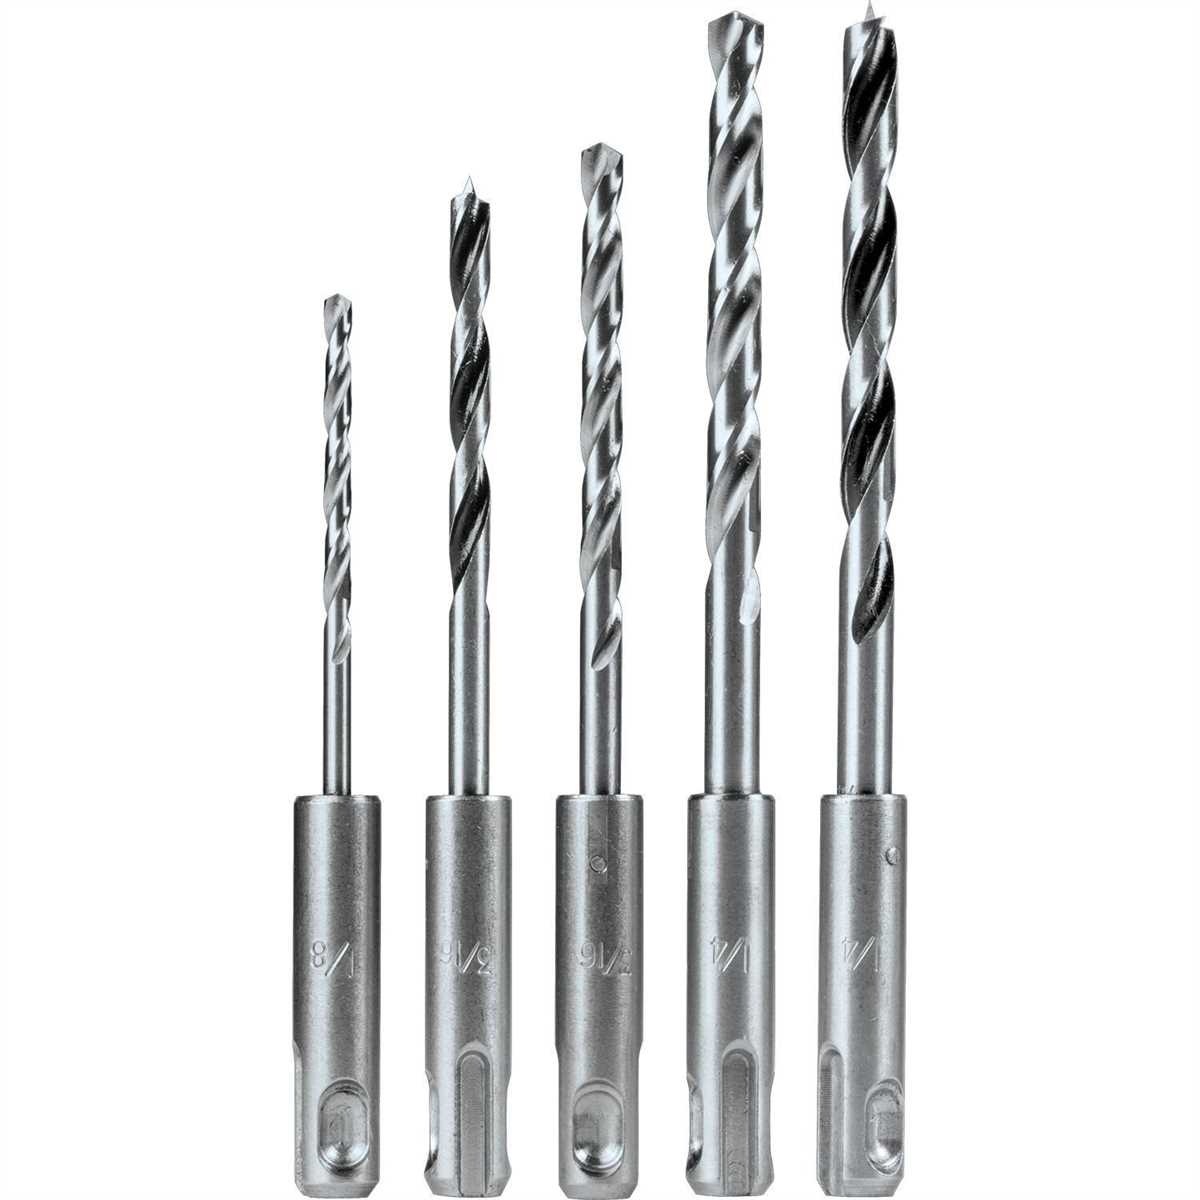 1. What are metal drill bits?